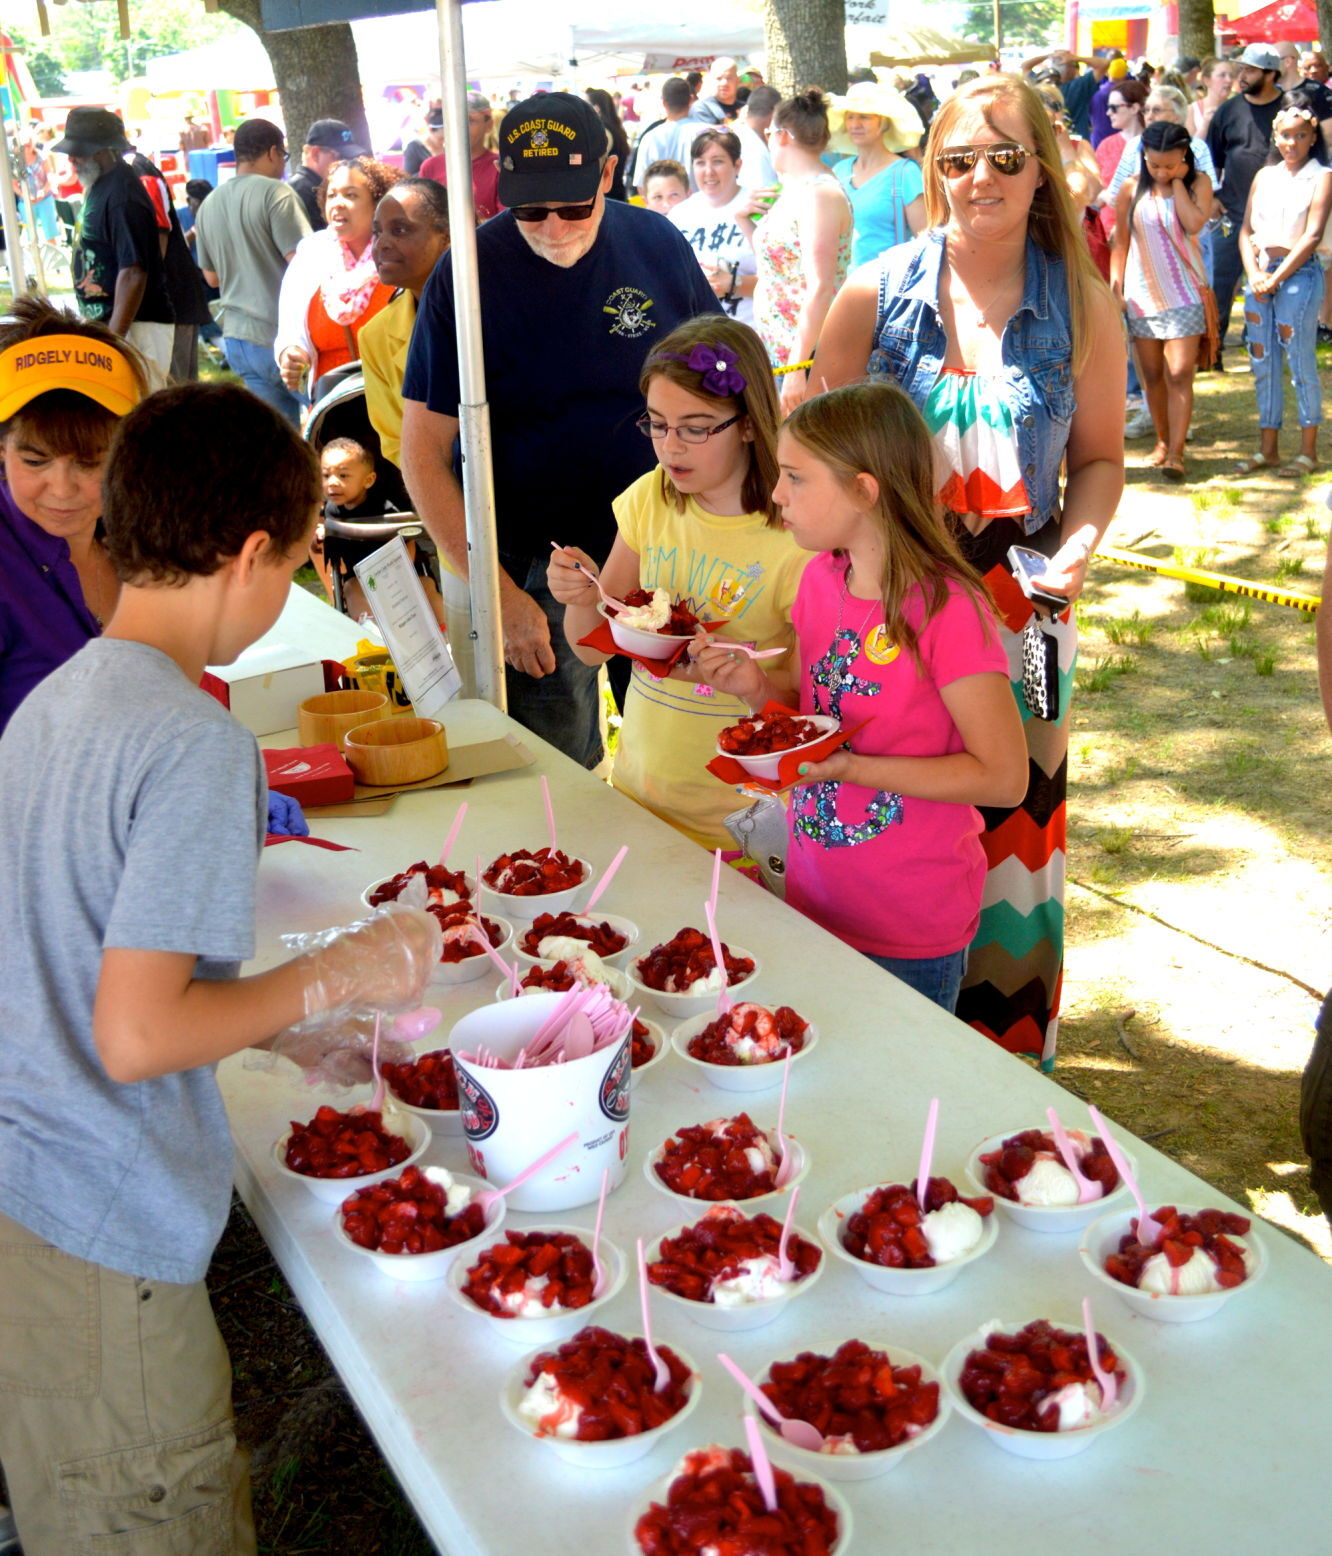 Thousands visits Ridgely for Strawberry Festival Schools